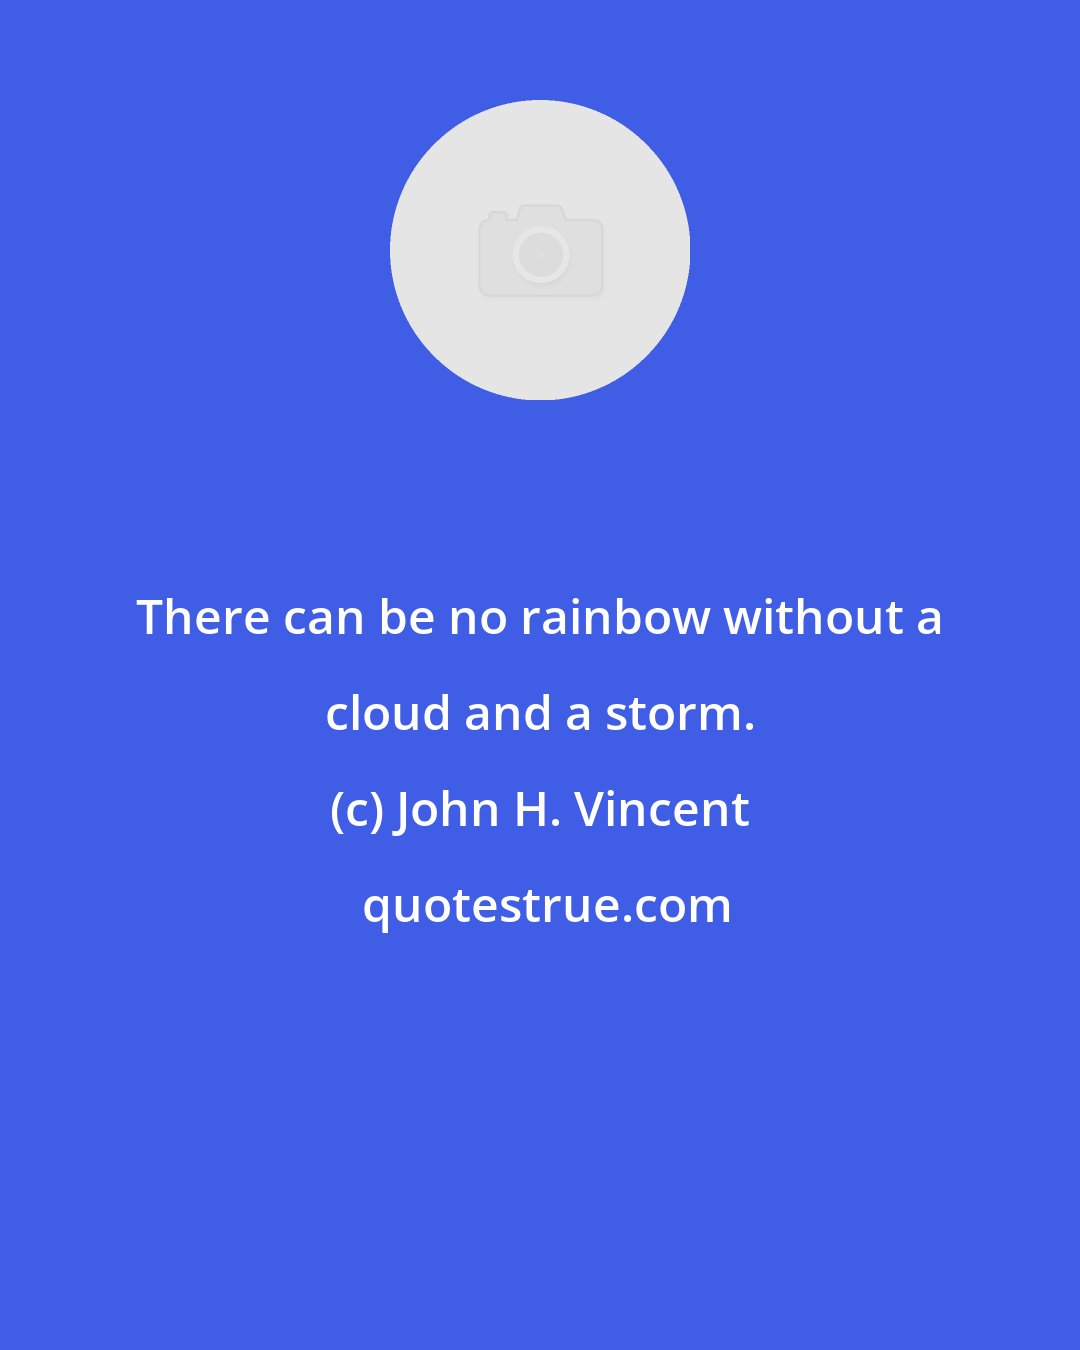 John H. Vincent: There can be no rainbow without a cloud and a storm.